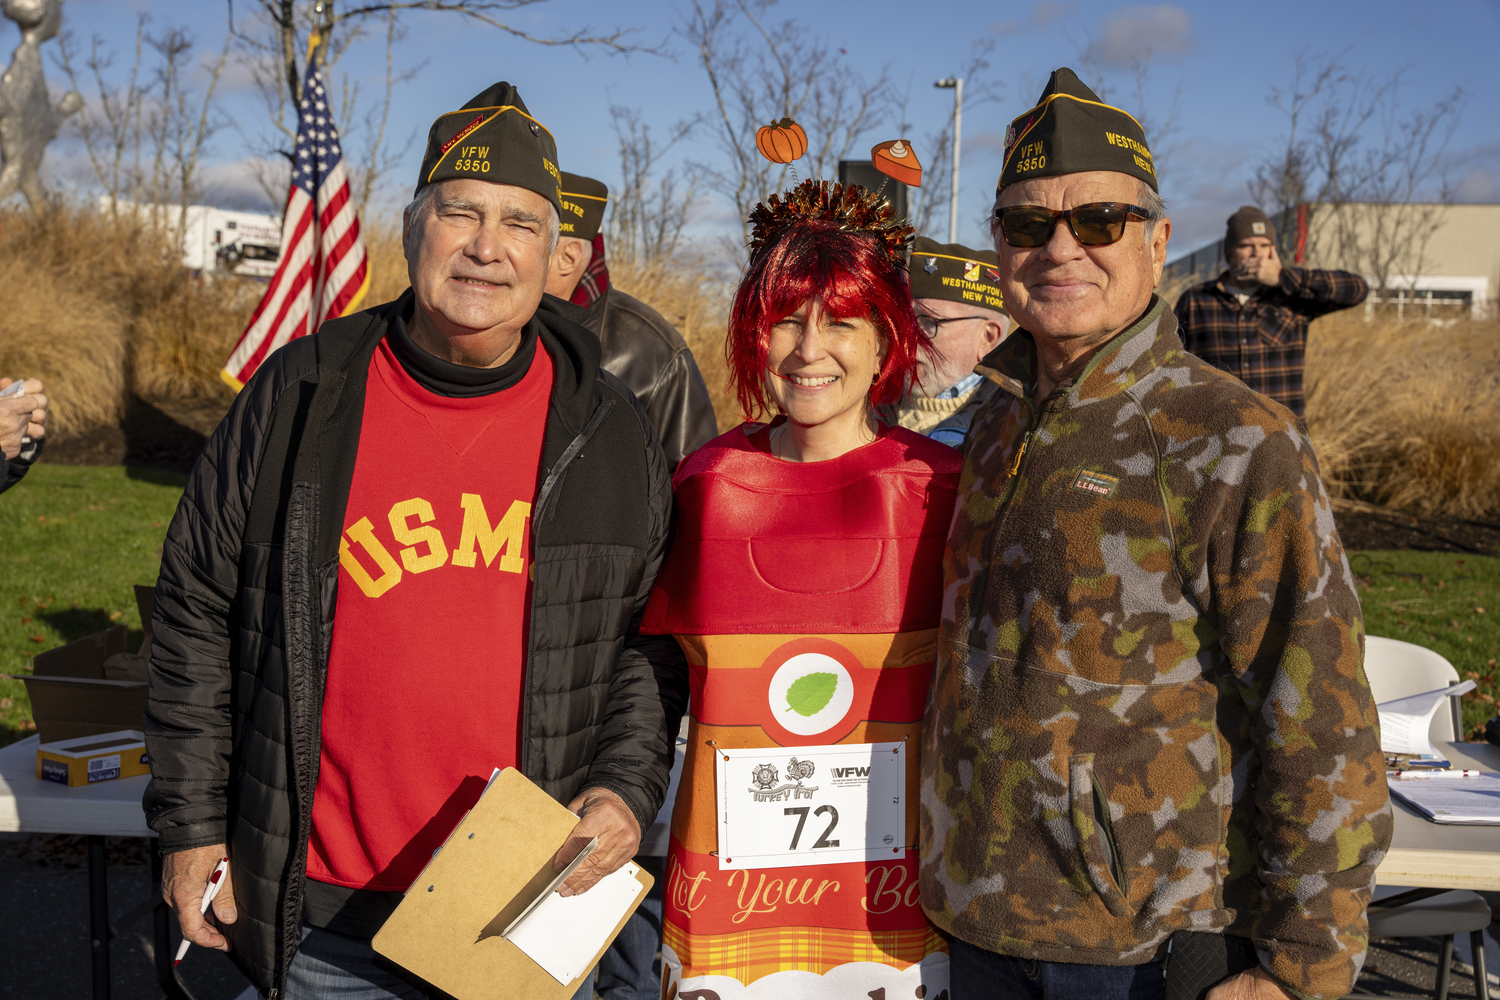 Donald Skeinert, Paula Eglivsky and Paul Eglivsky at the Westhampton Veterans of Foreign Wars seventh annual Turkey Trot at at Francis S. Gabreski Airport on Thanksgiving Day.  RON ESPOSITO